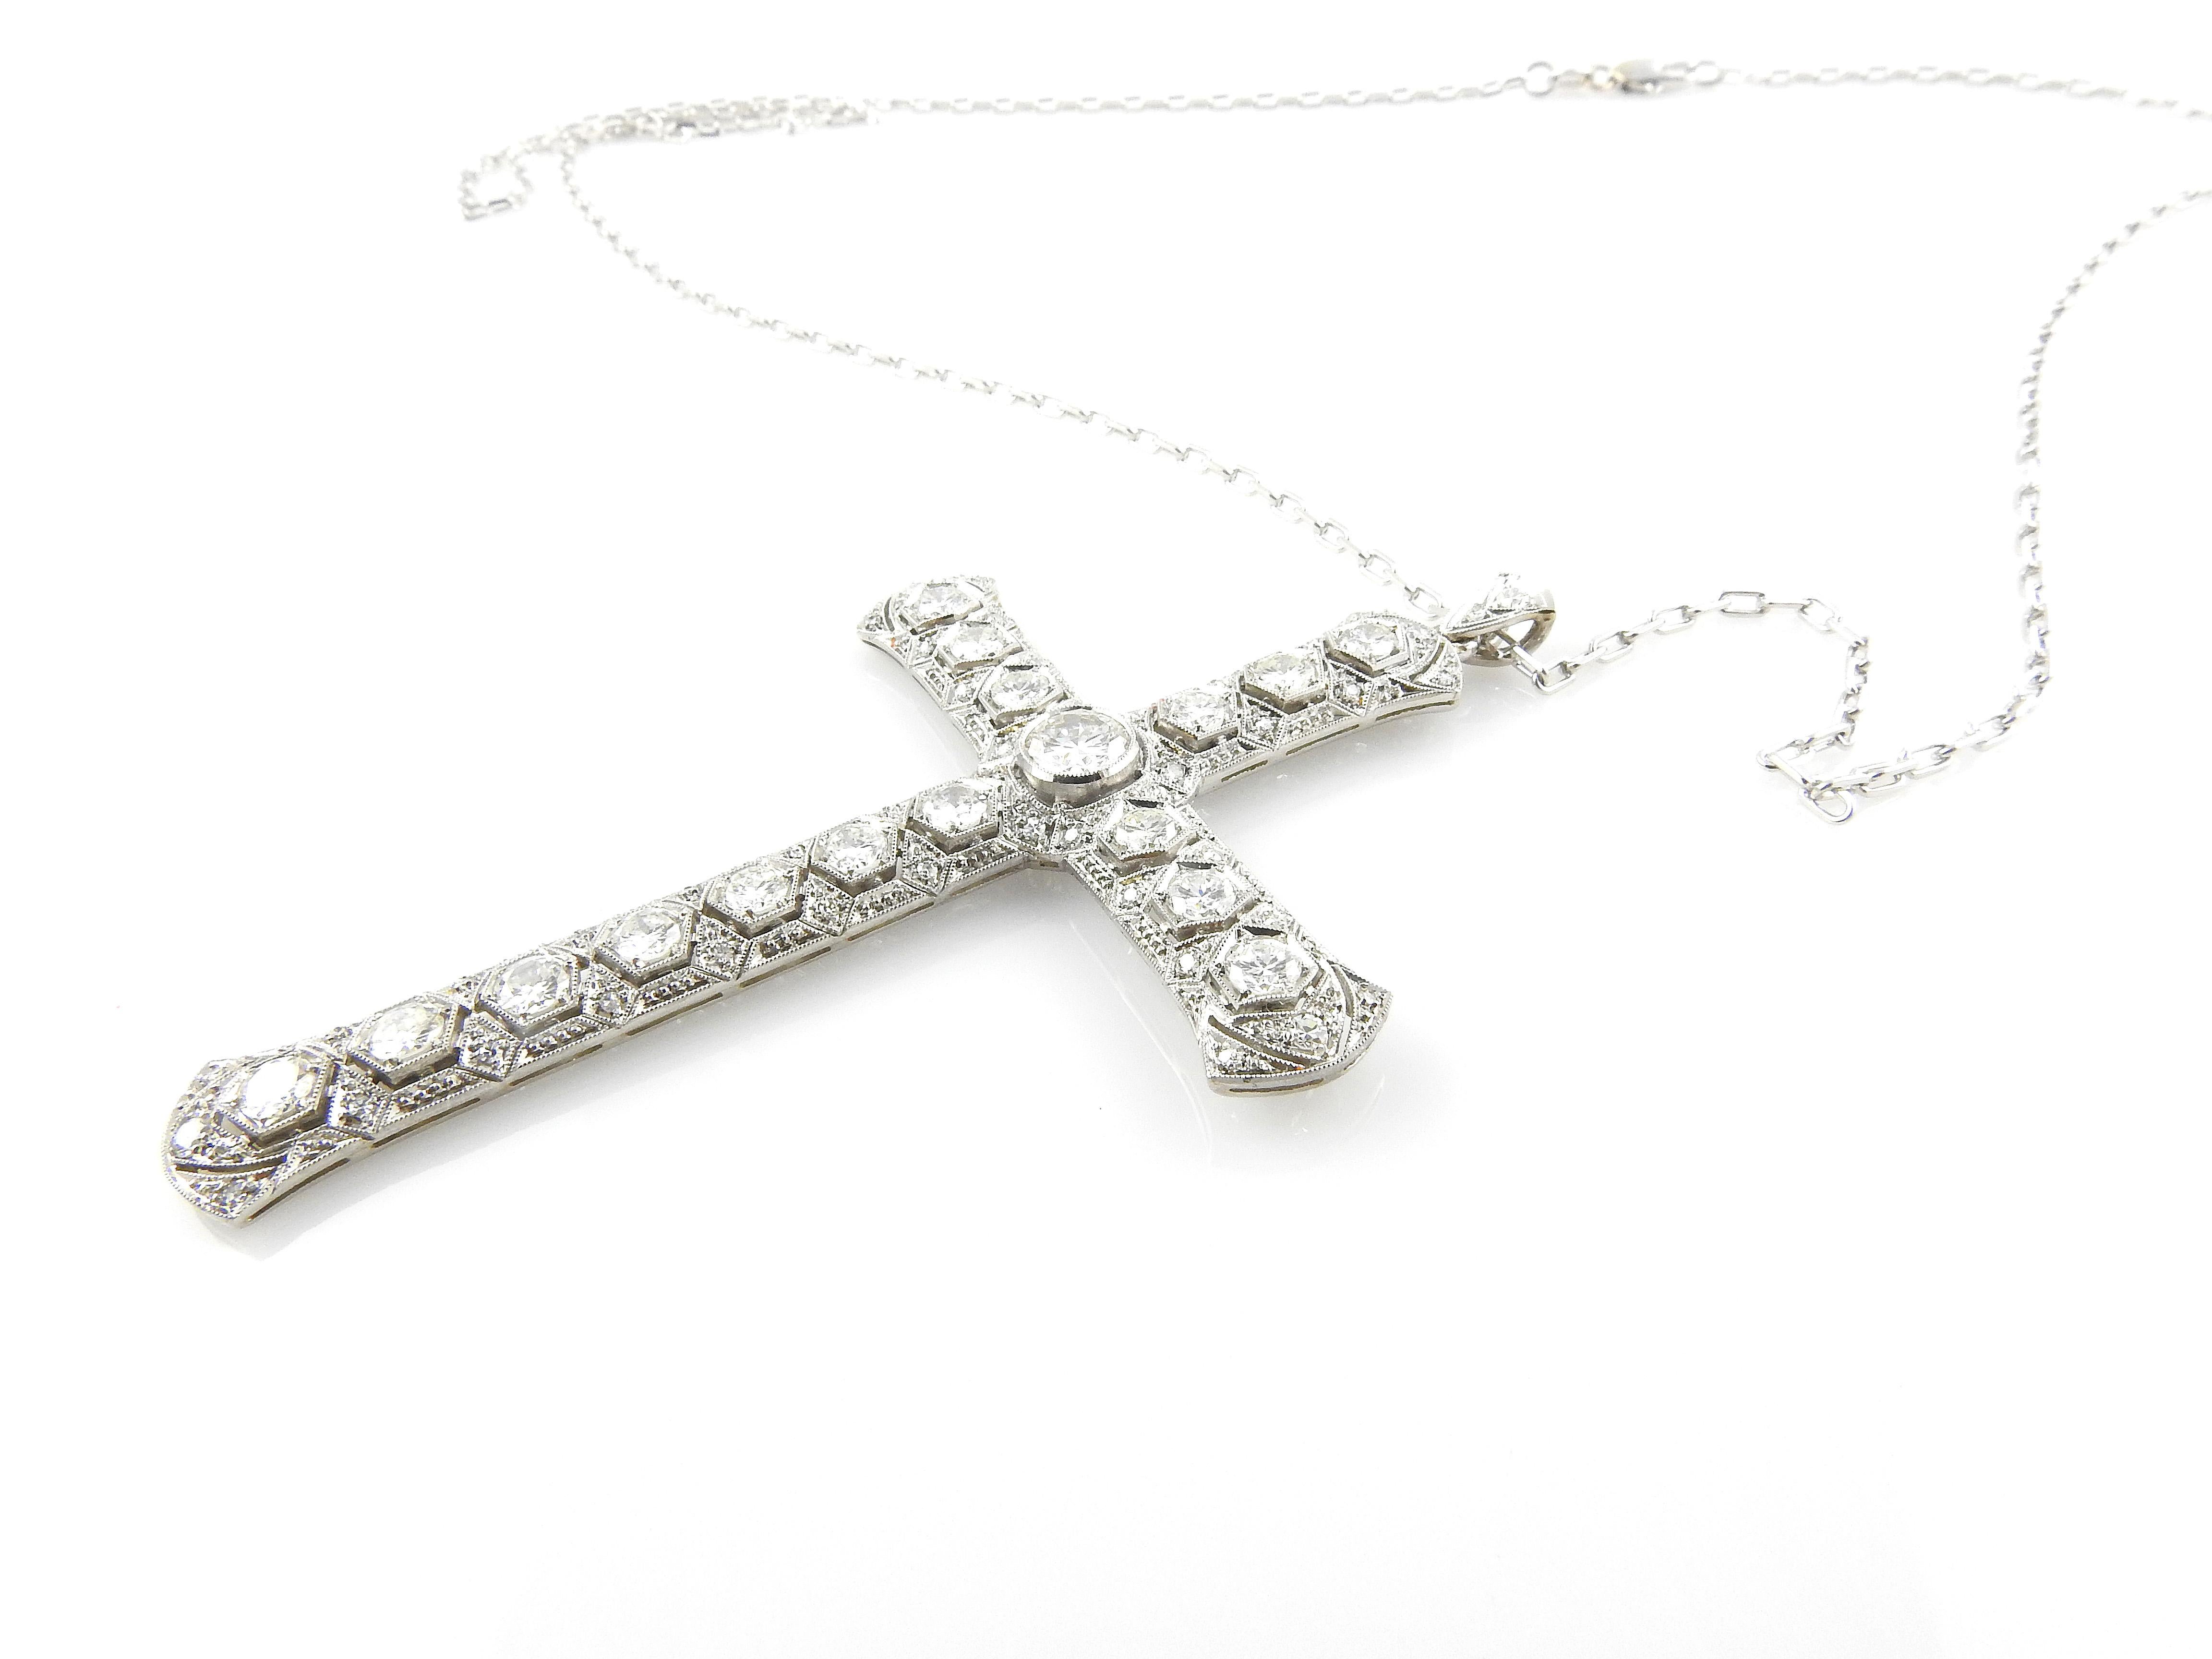 14K White Gold Large Diamond Cross Pendant Necklace 3.51cts #14328 For Sale 3